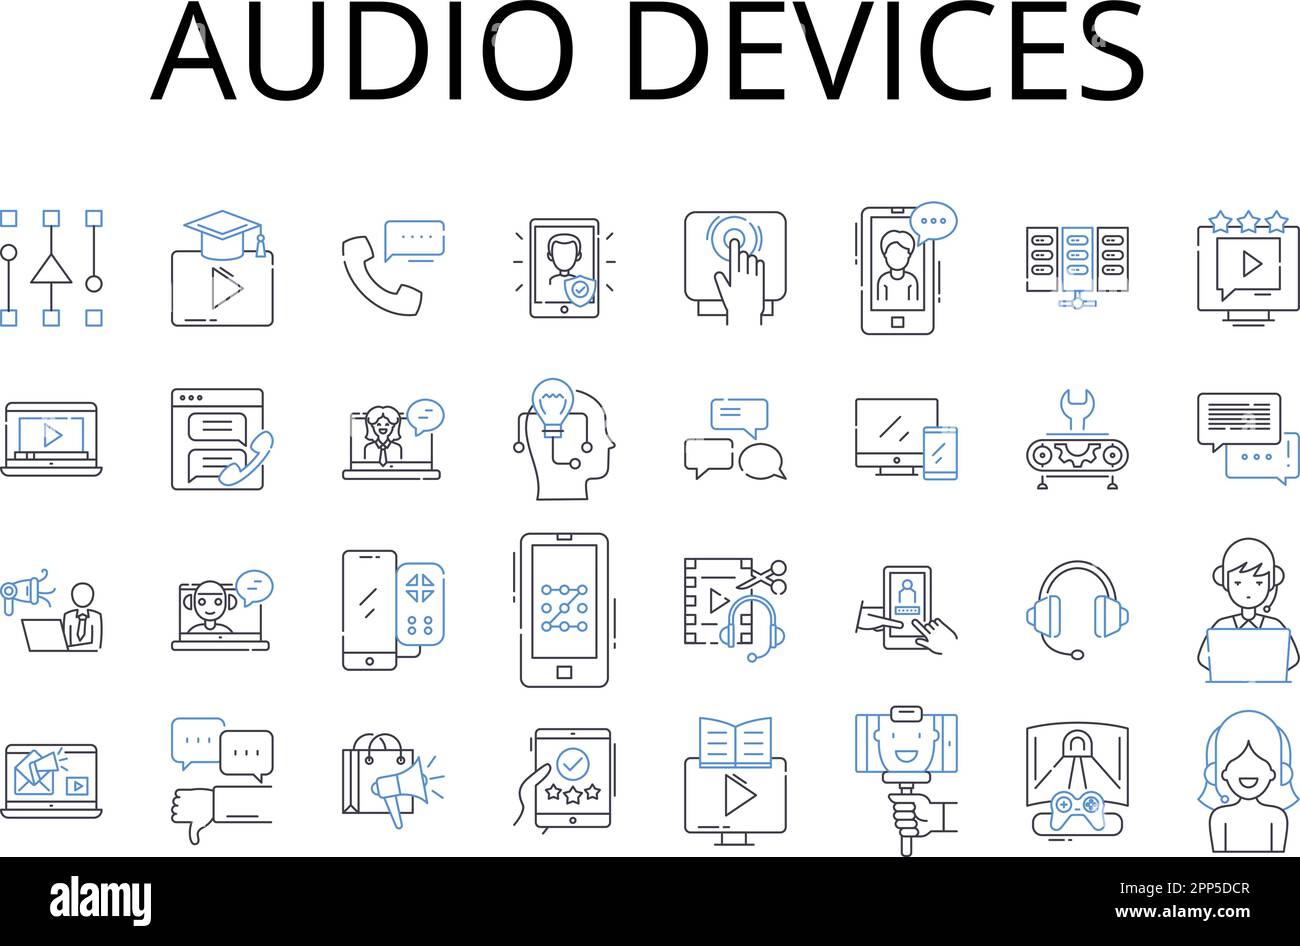 Audio devices line icons collection. Text messages, Video games, Musical instruments, Security systems, Image editing, Social media, Mobile devices Stock Vector